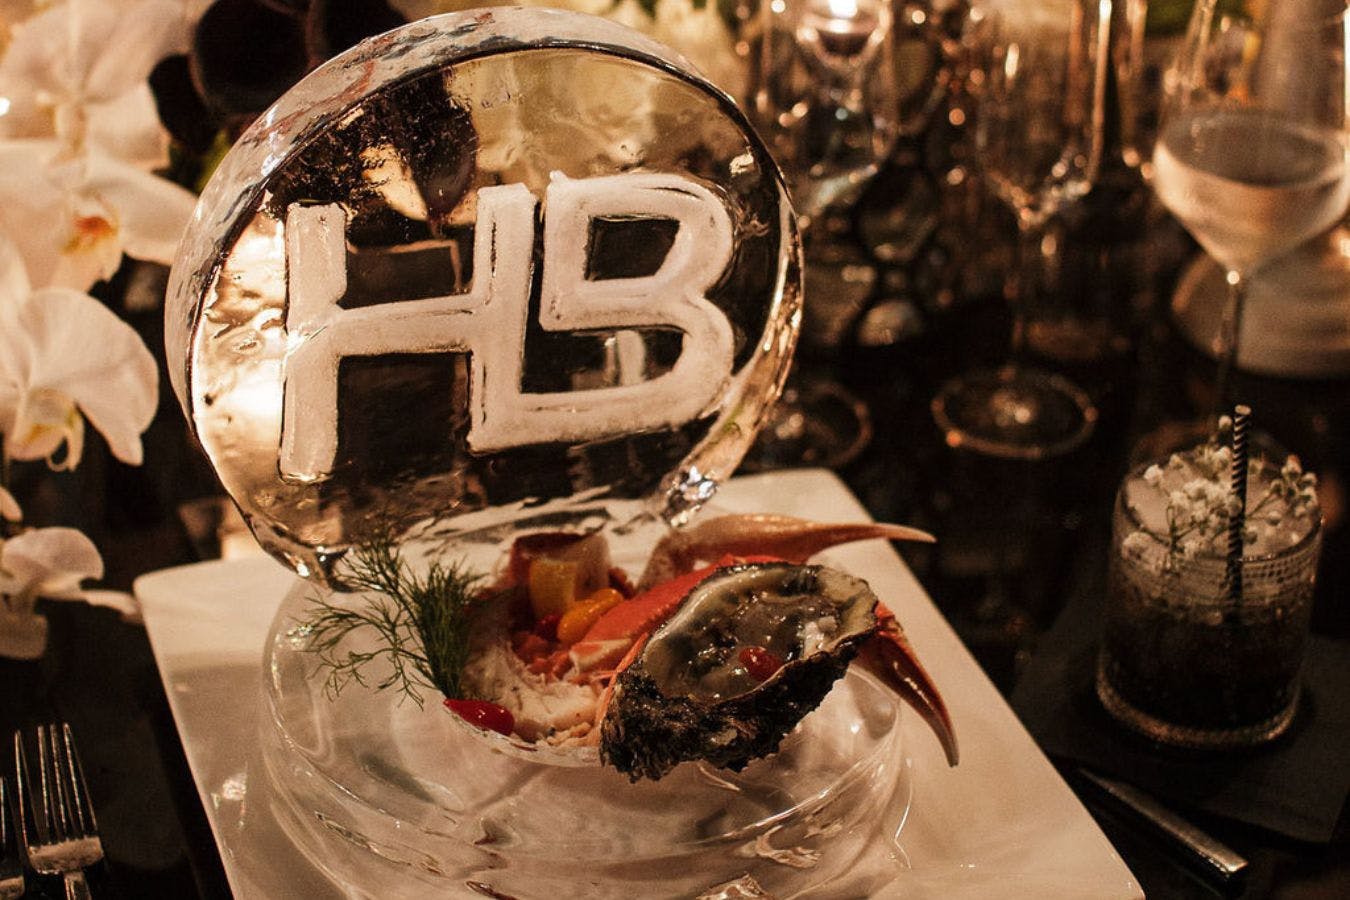 Personalized seafood tower as a 2023 wedding trend | PartySlate